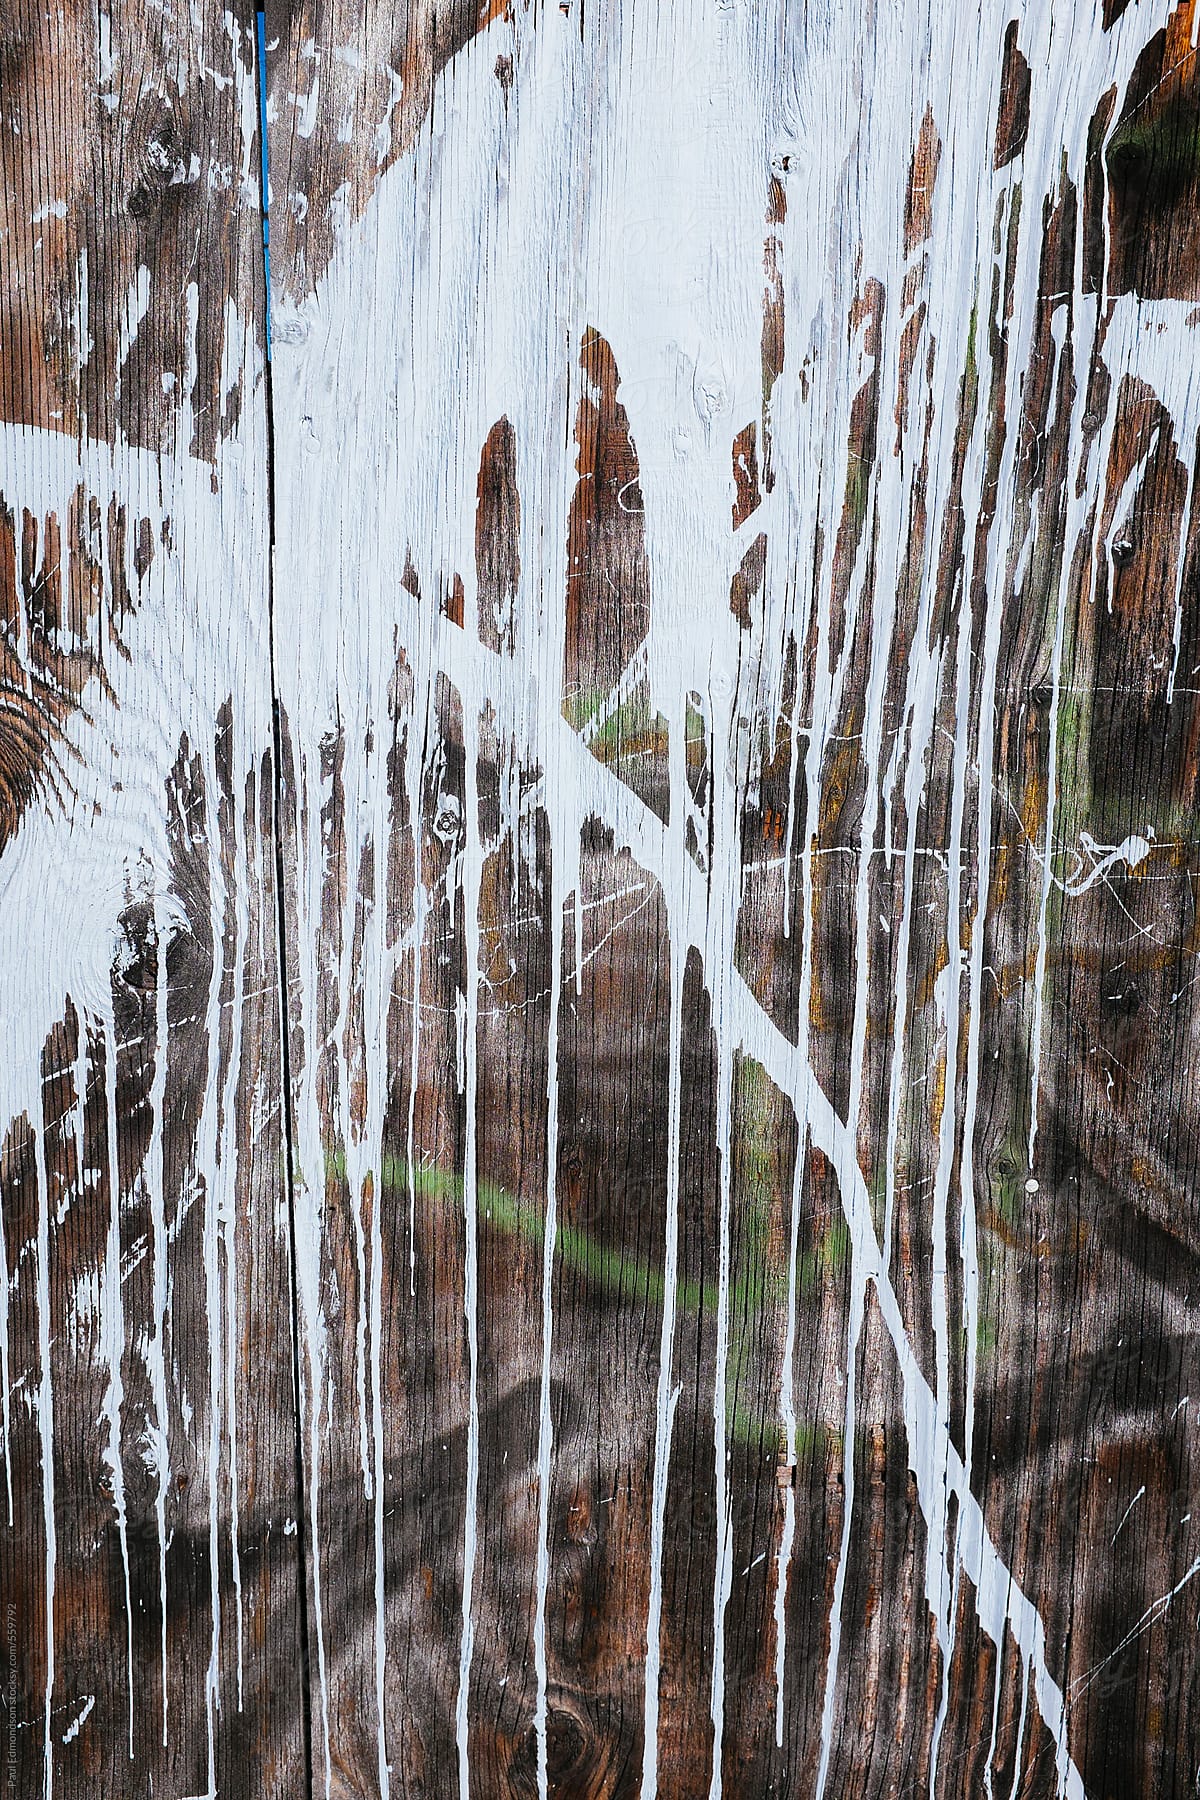 Paint splattered across worn plywood wall, close up